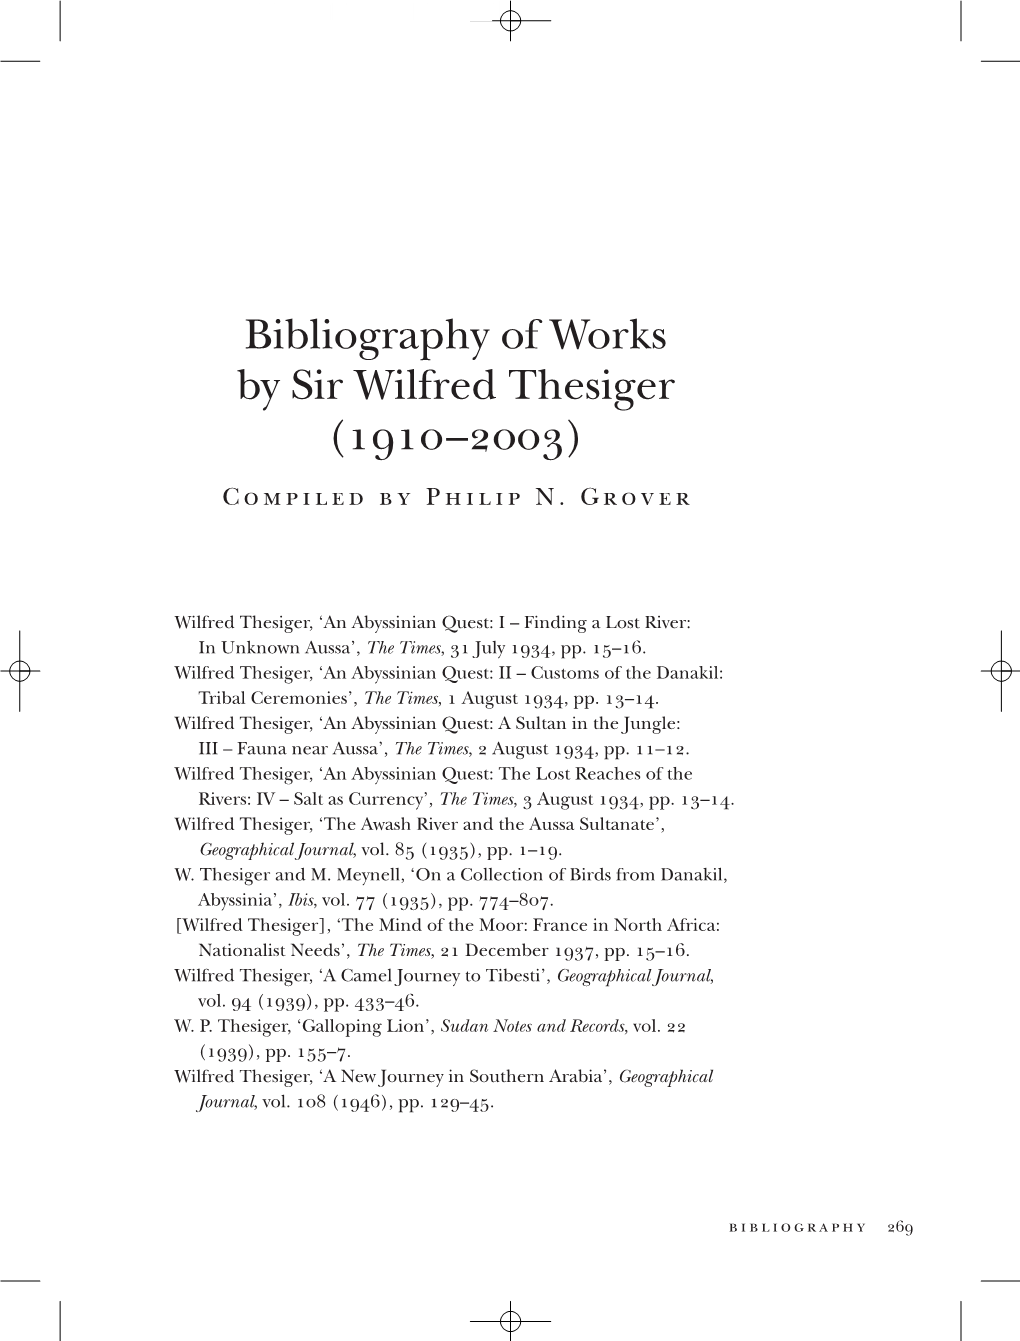 Bibliography of Works by Sir Wilfred Thesiger (1910–2003) Compiled by Philip N